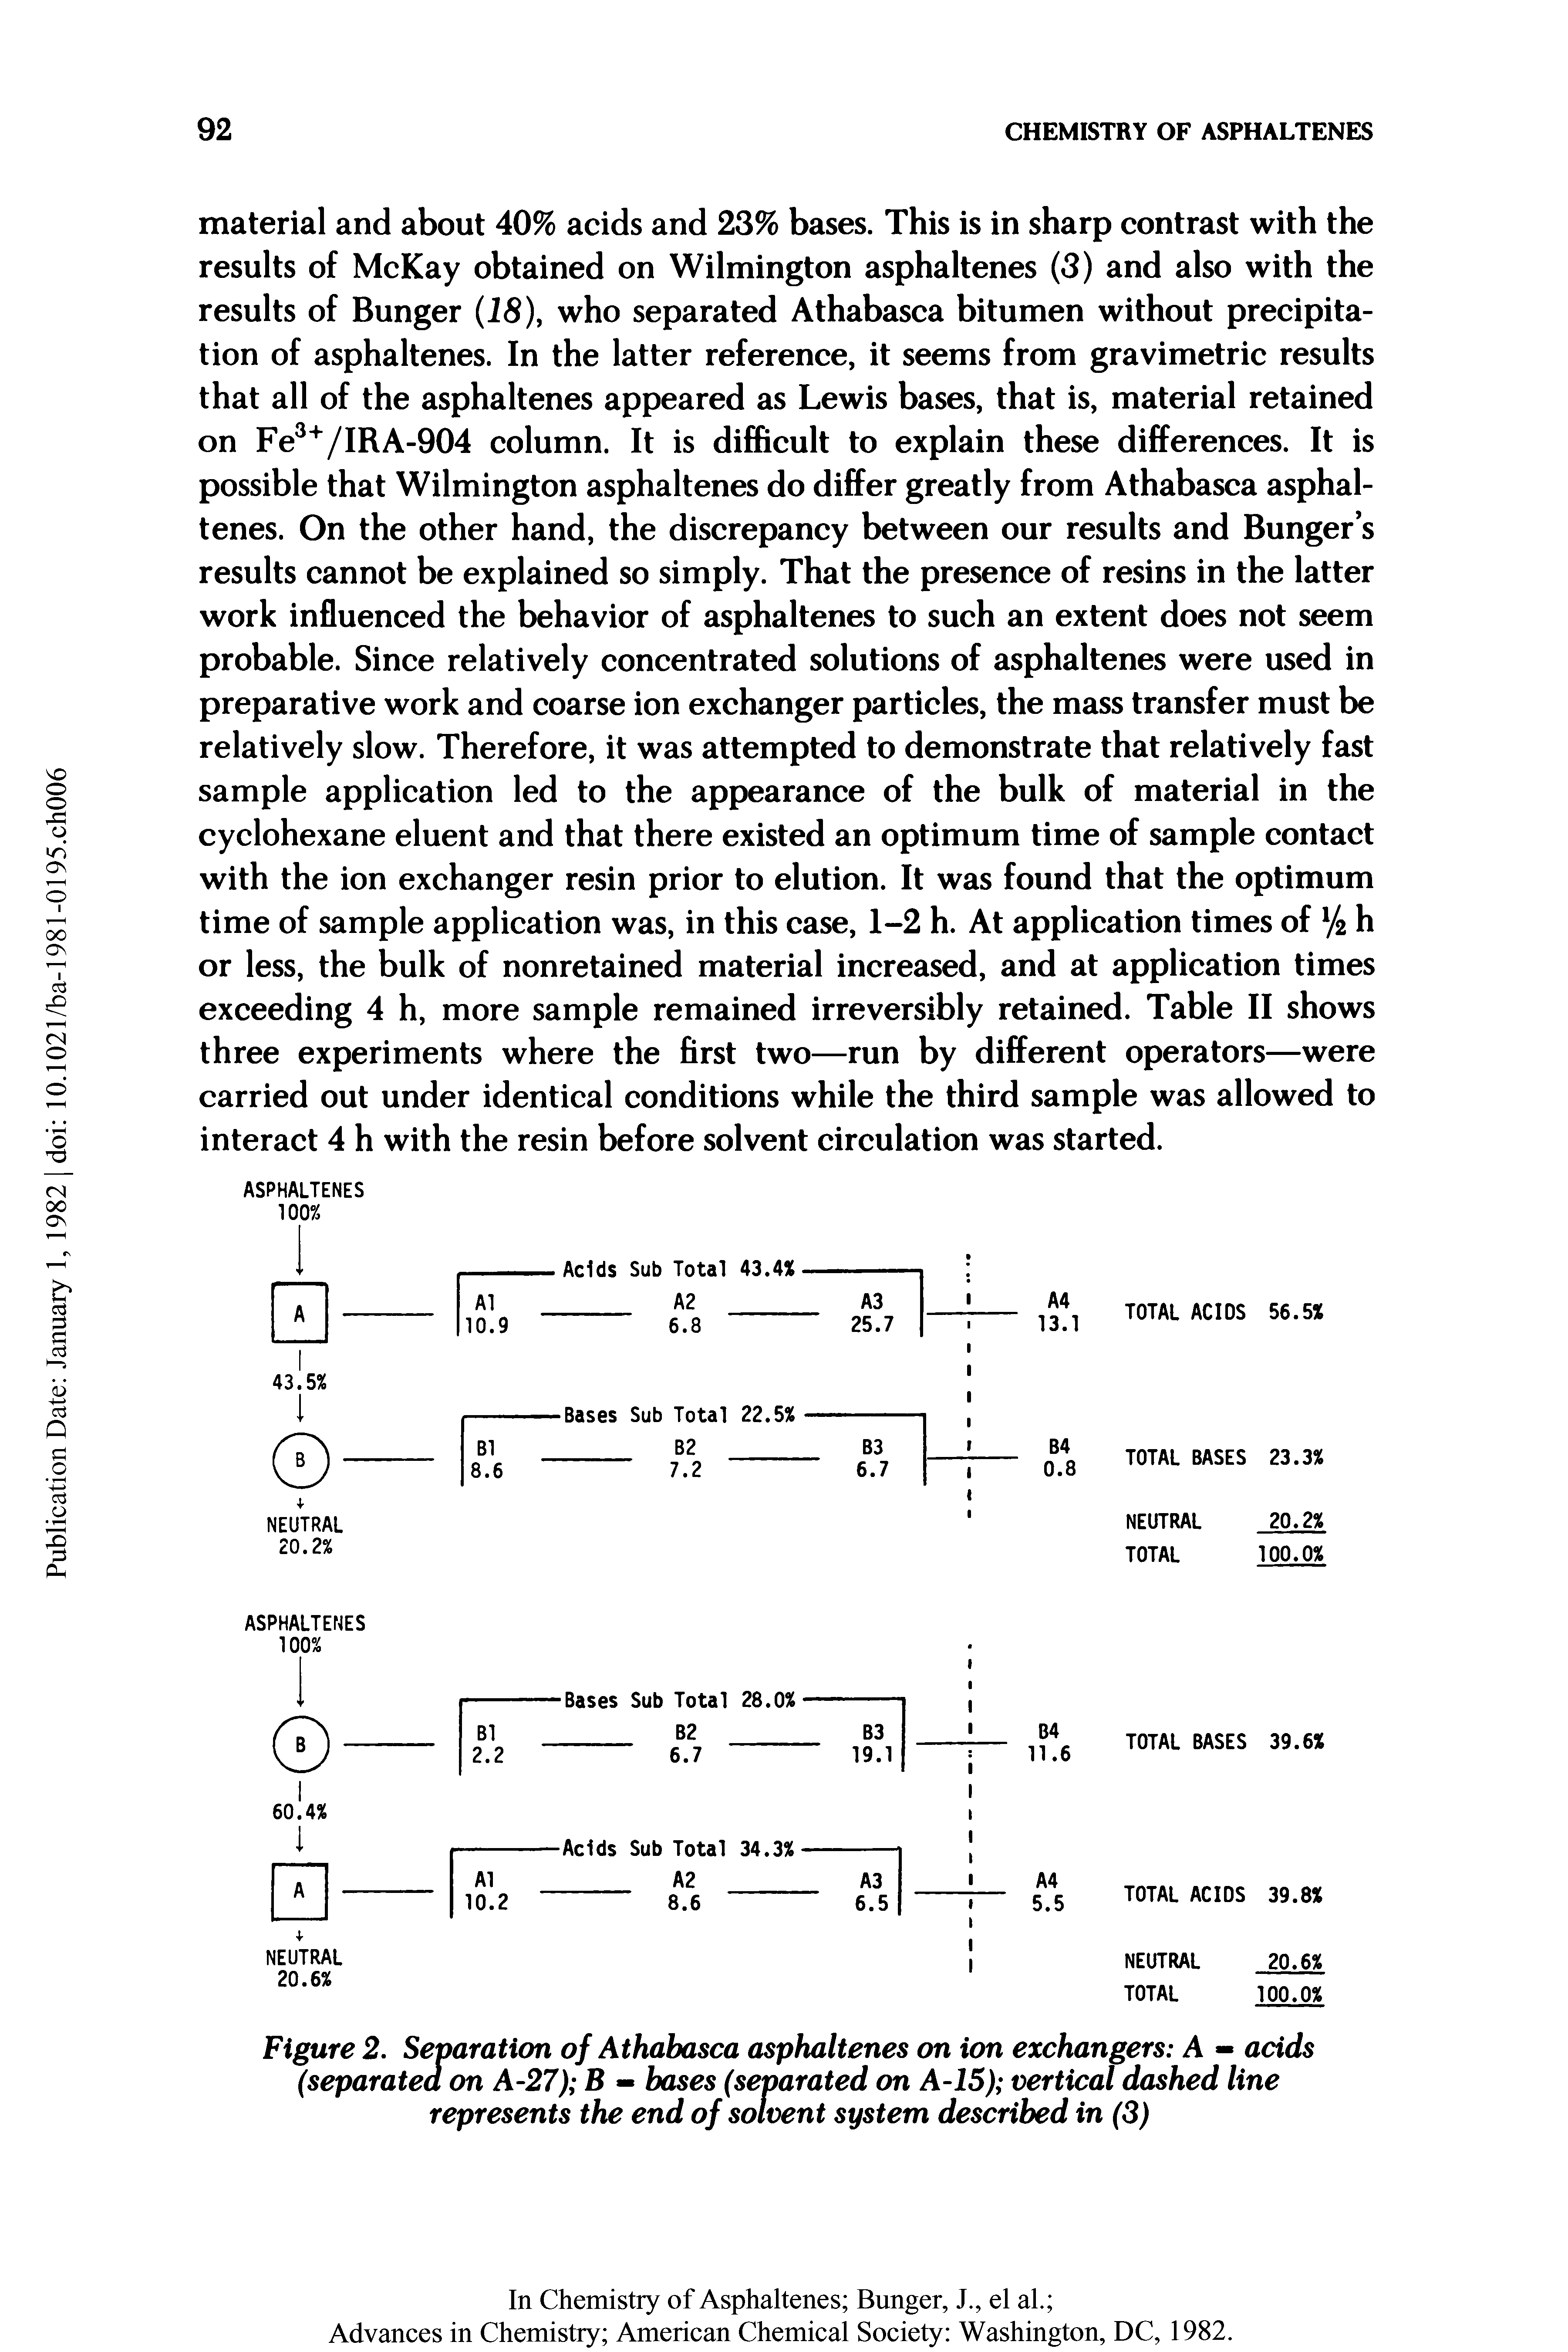 Figure 2. Separation of Athabasca asphaltenes on ion exchangers A - adds (separated on A-27) B - bases (separated on A-15) vertical dashed line represents the end of solvent system described in (3)...